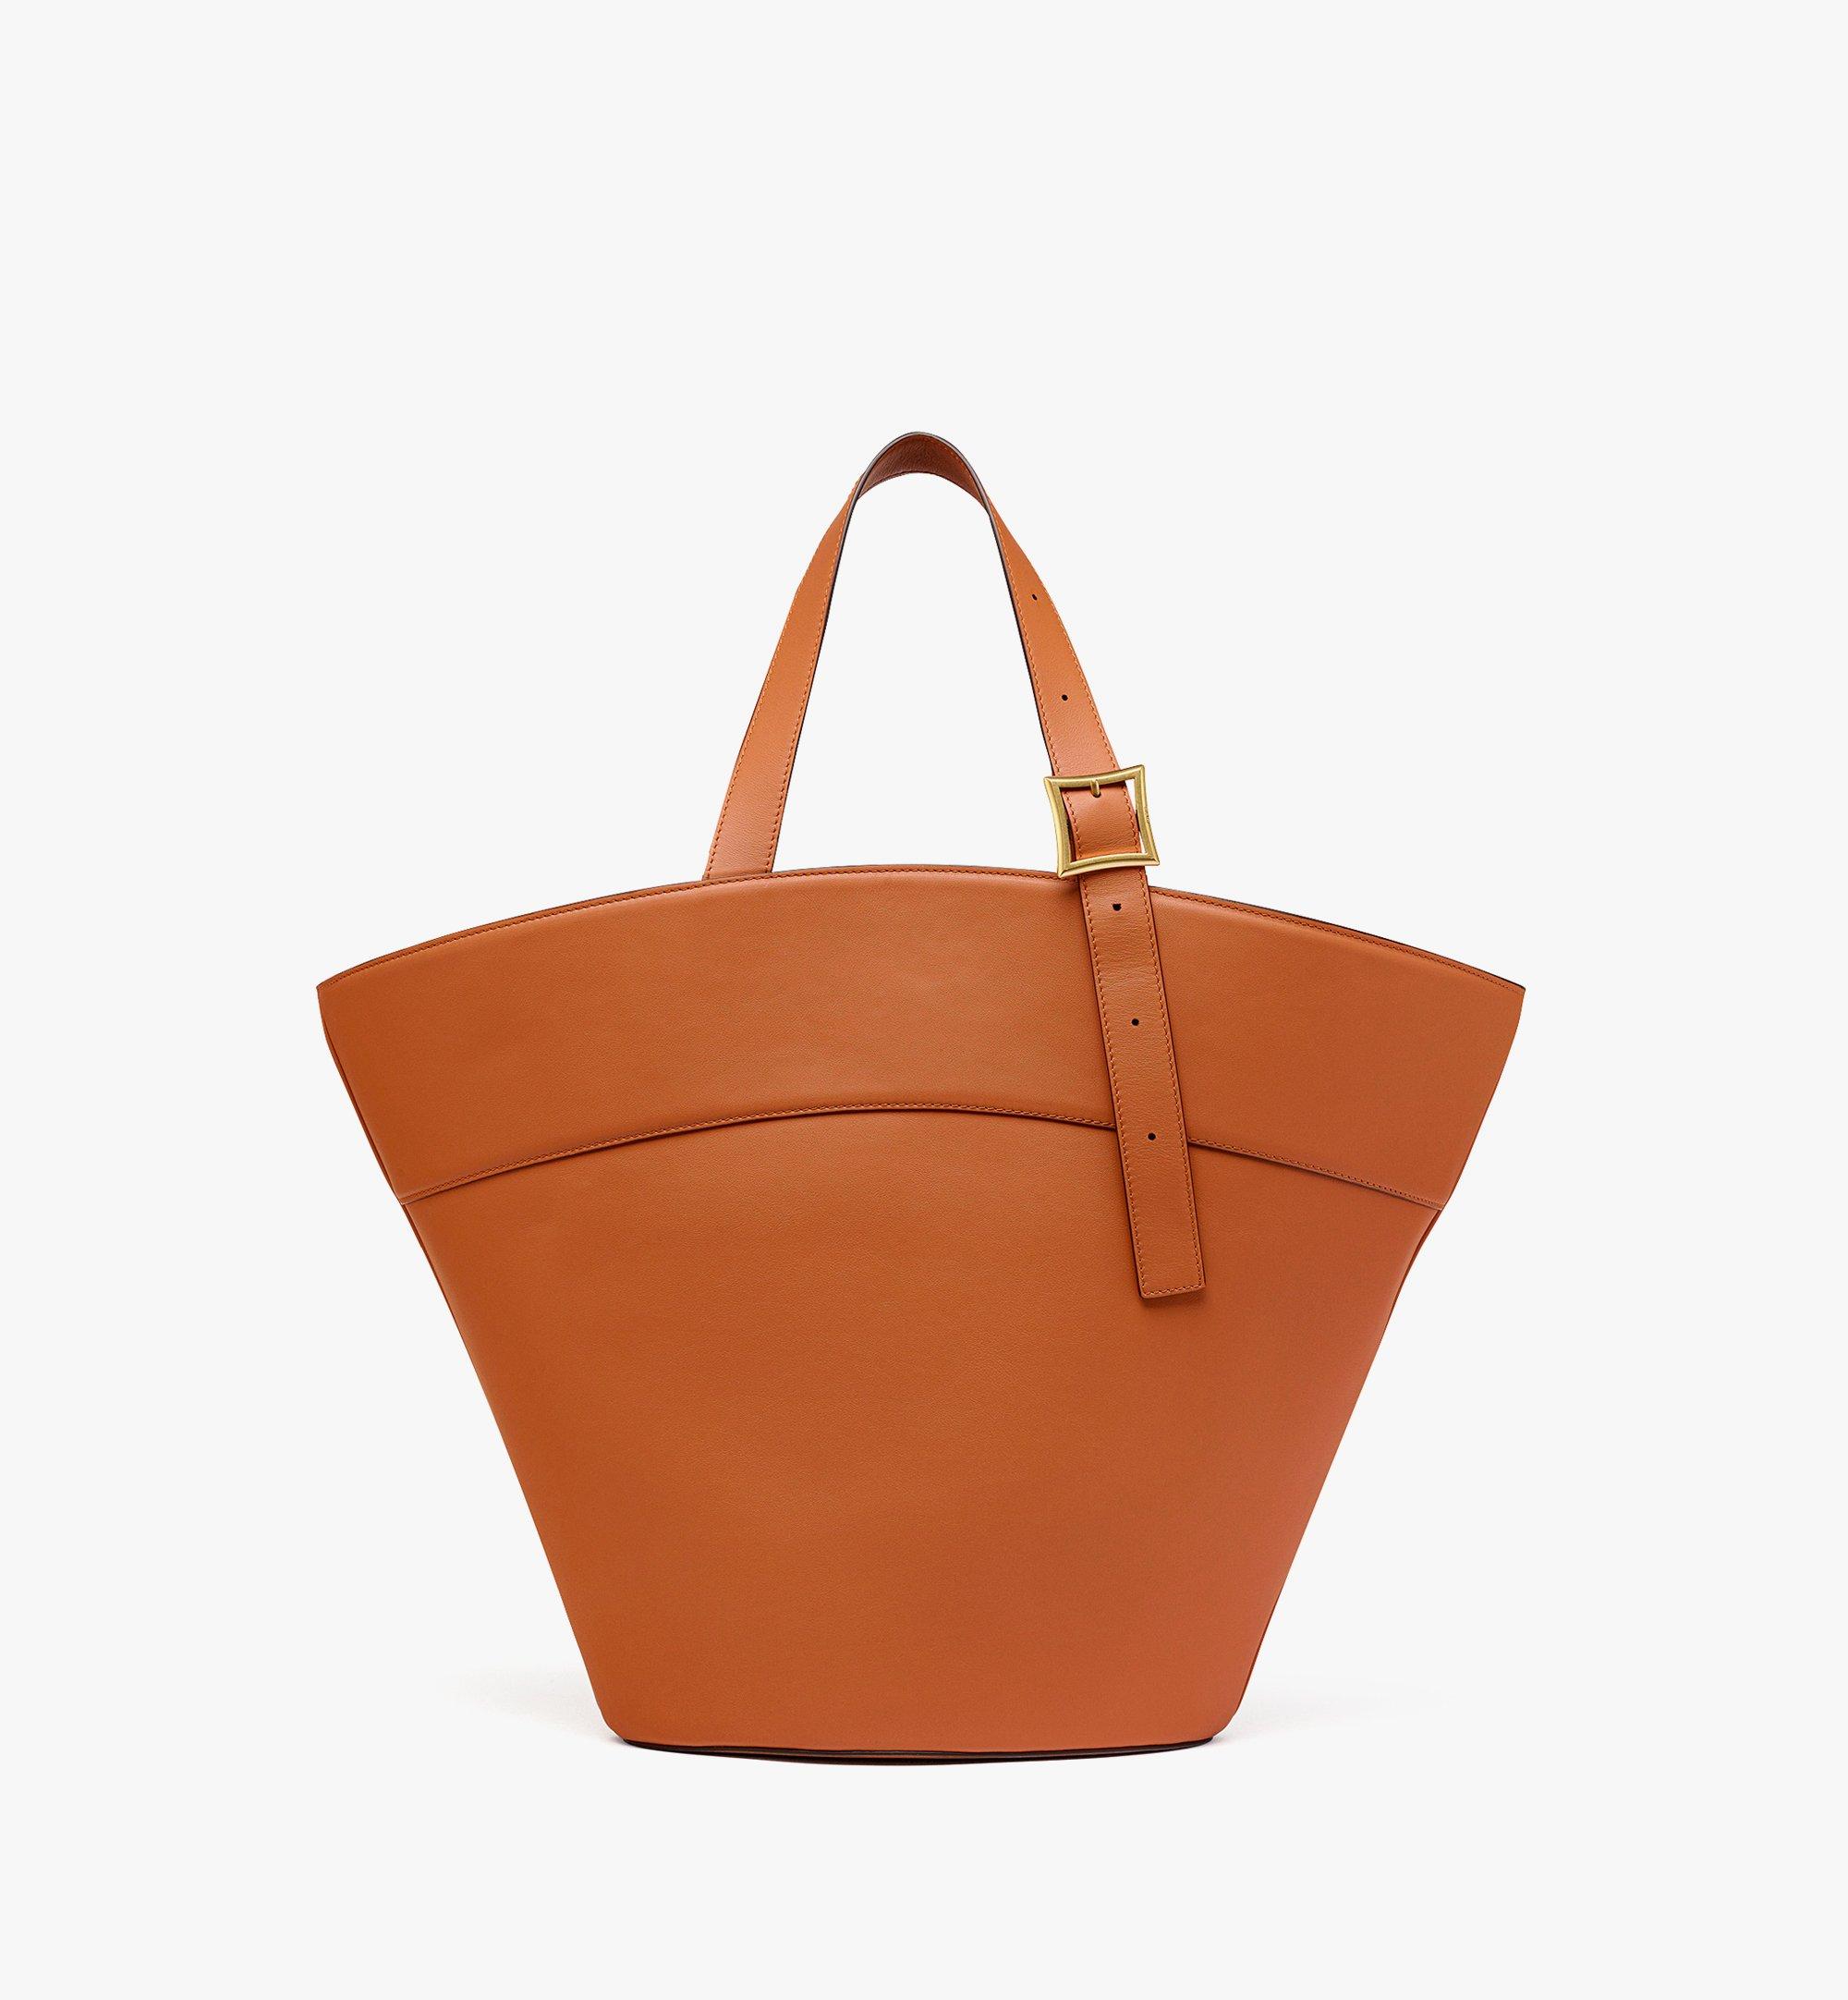 Spanish Nappa ®US | Large Leather in MCM Himmel Cognac Tote